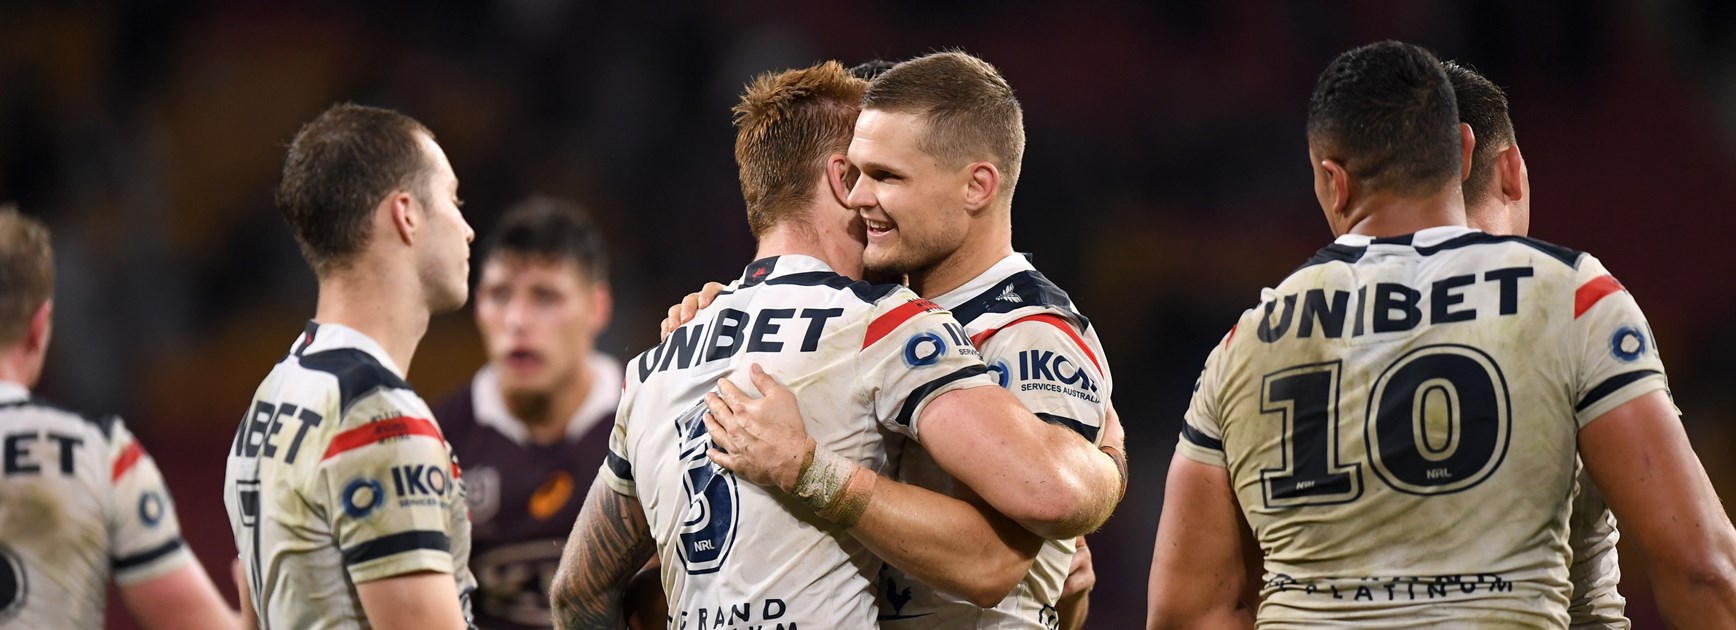 Roosters Edge Broncos in Dramatic Suncorp Thriller